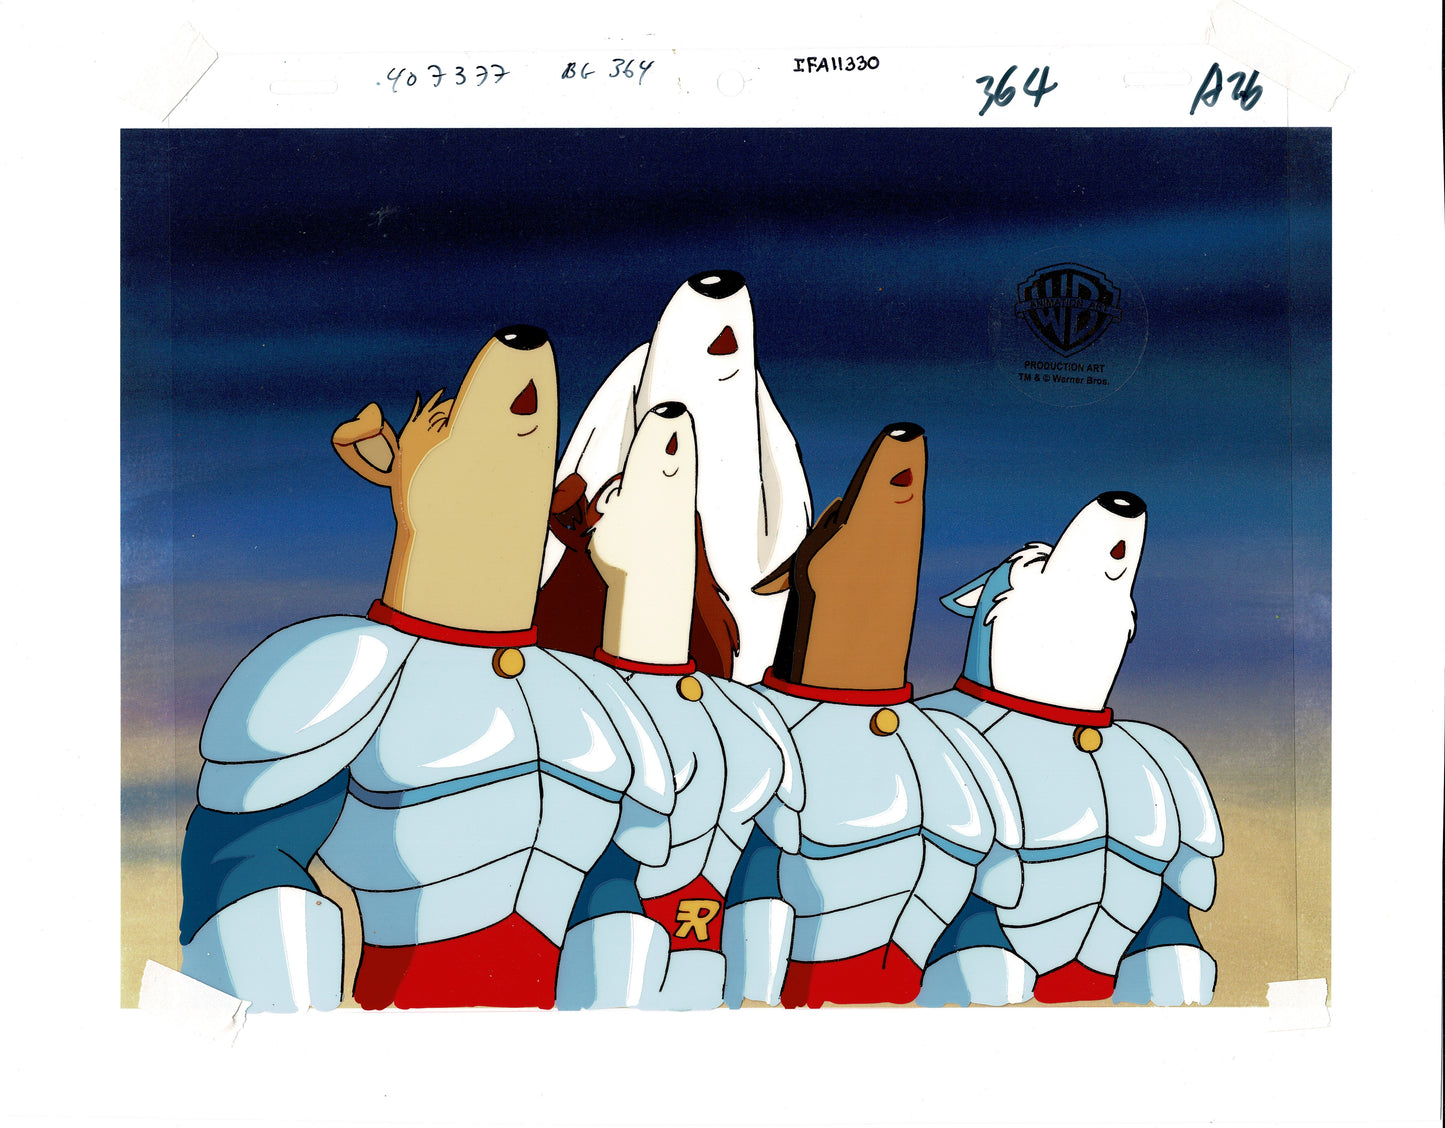 Road Rovers Hunter Colleen Shag n More Animation Cel Warner Brothers 1996-97 30